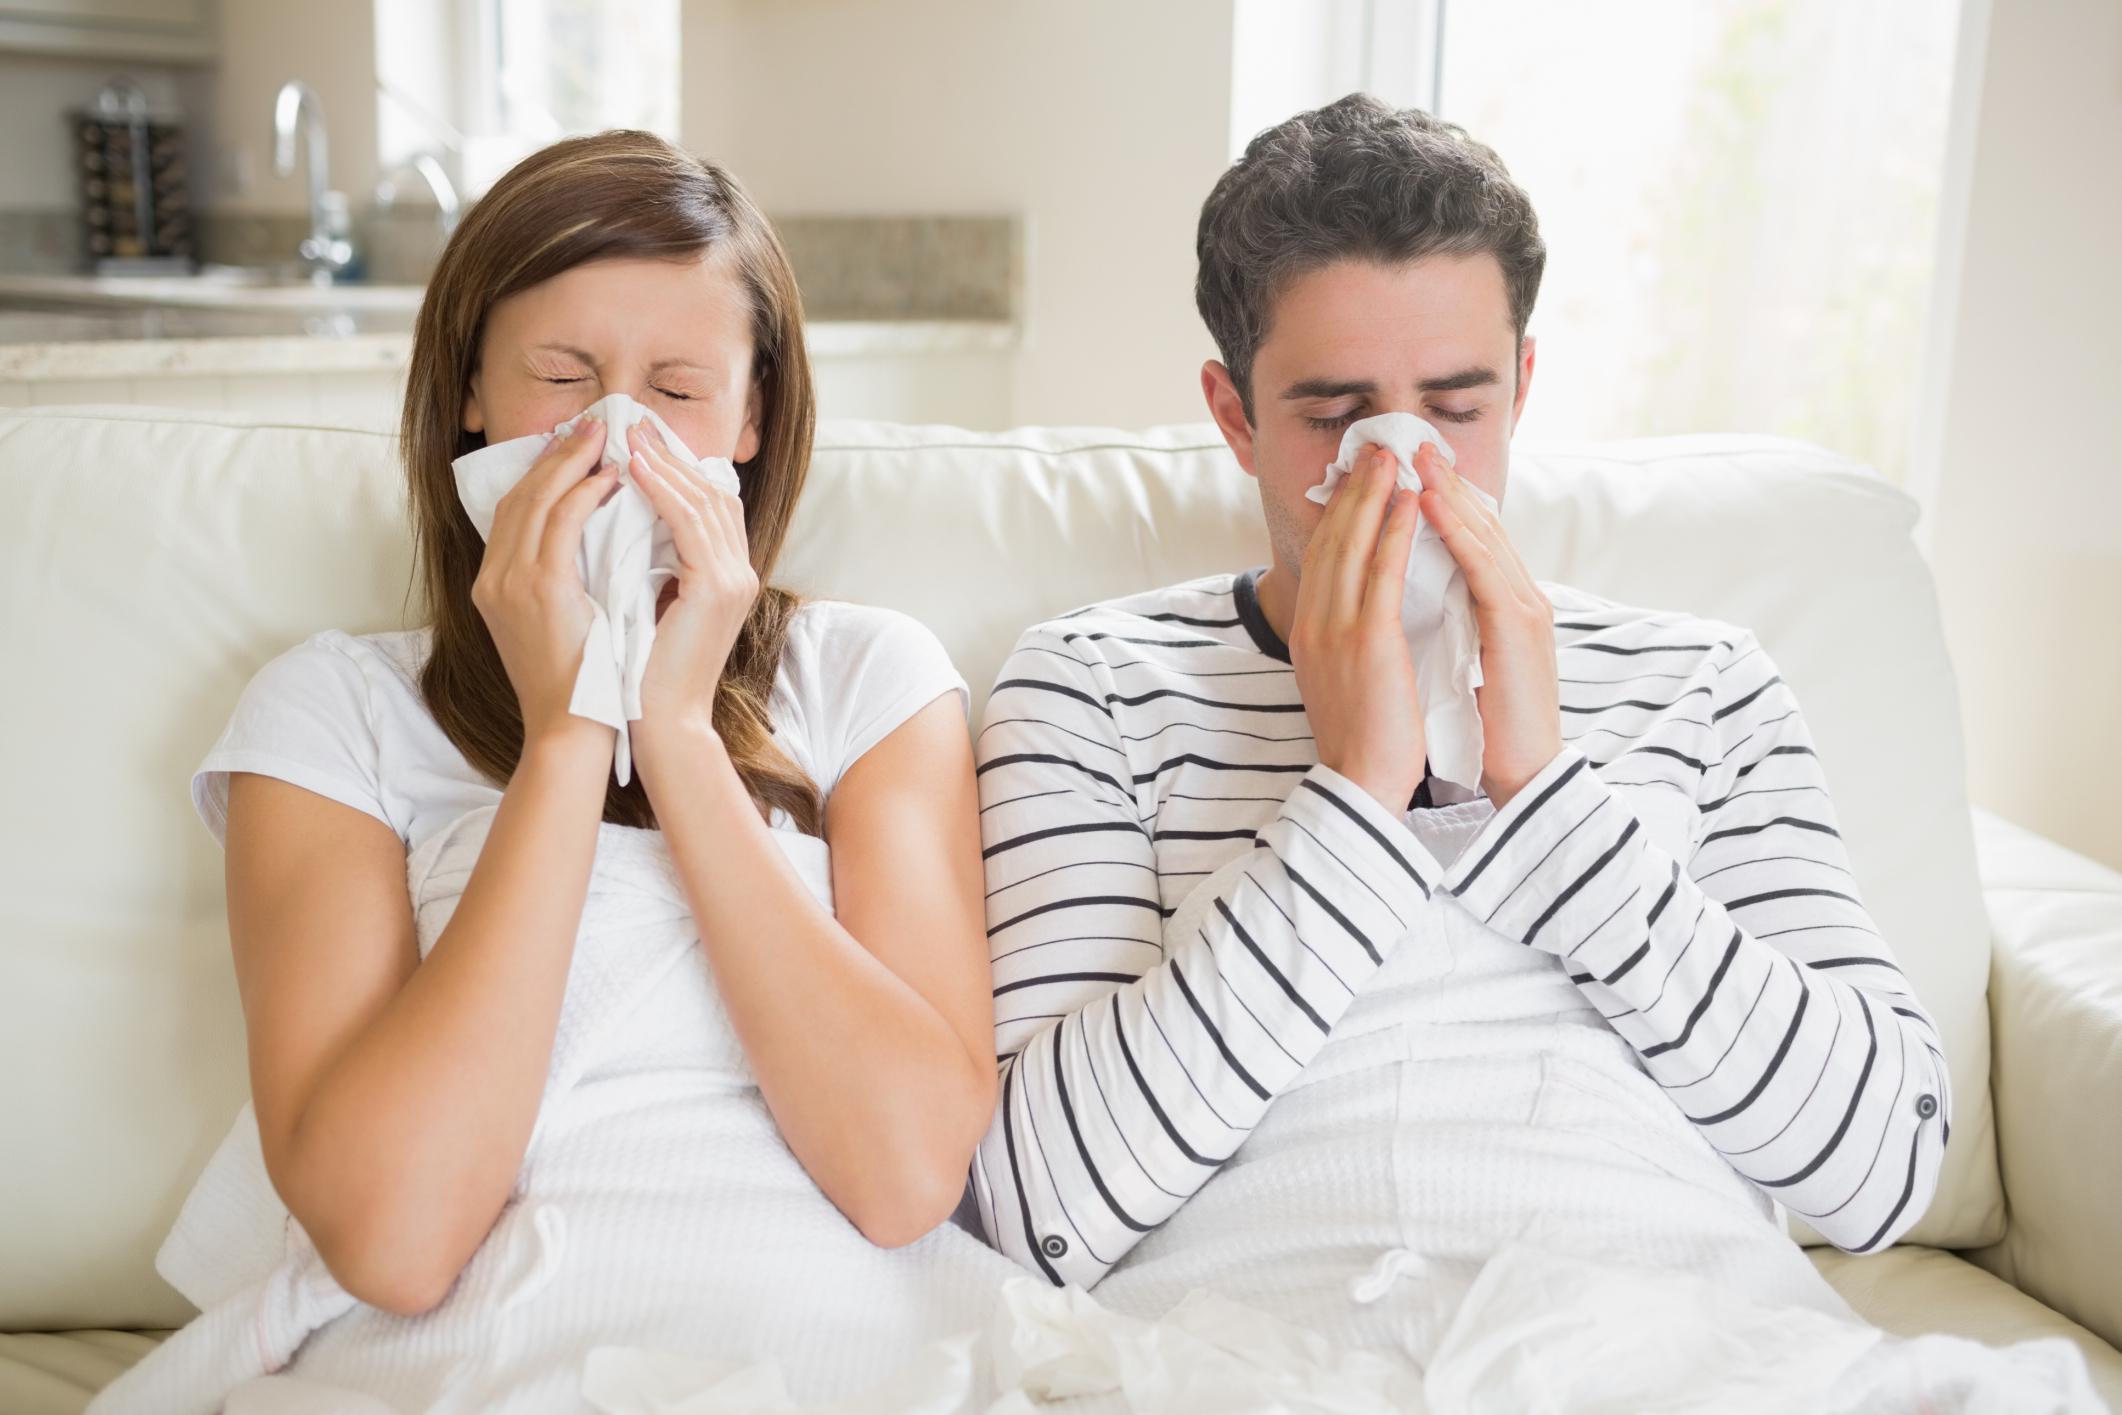 Flu usually breaks out during winter months